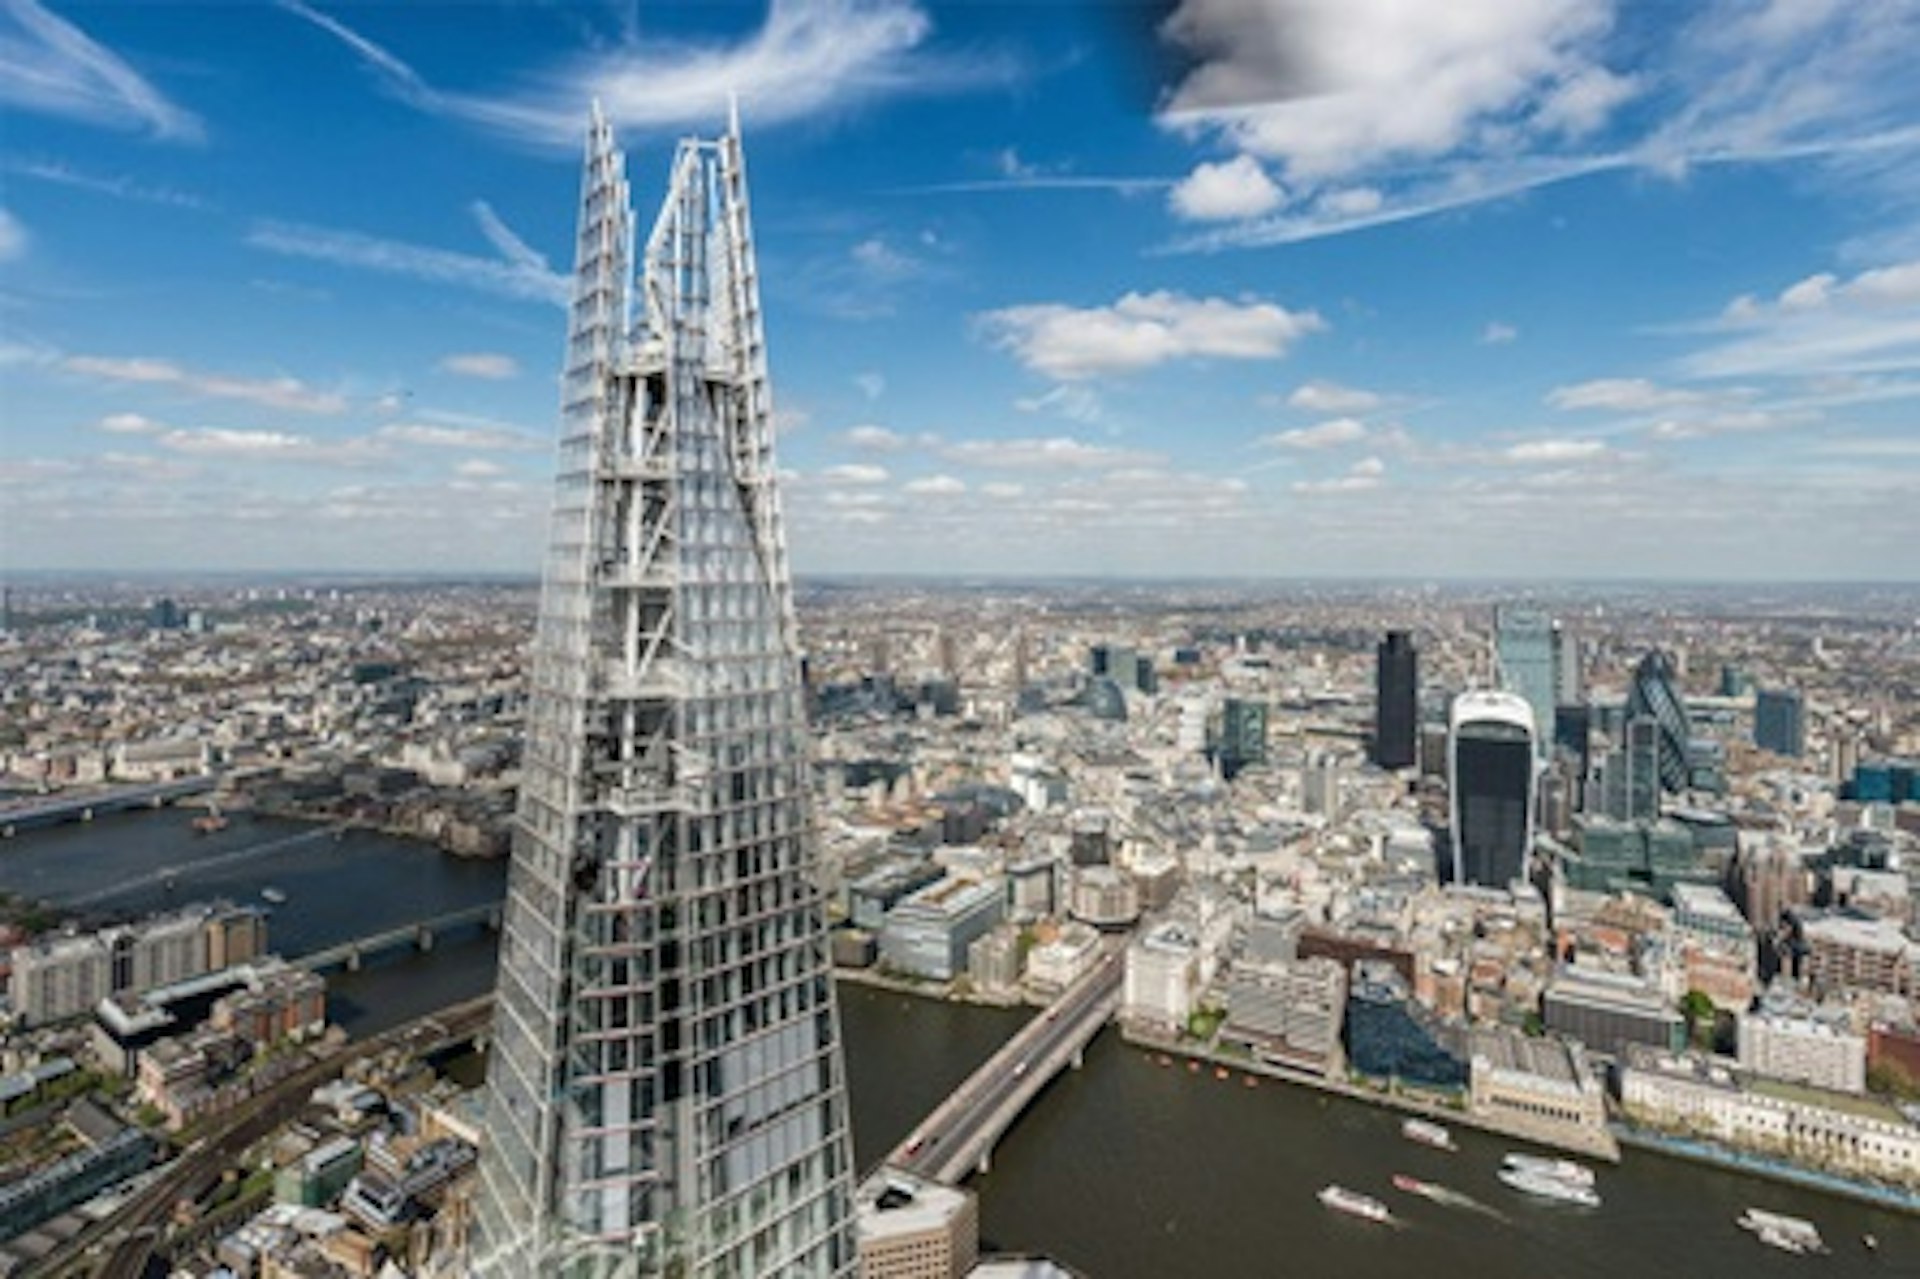 Visit to The View from The Shard with Signature Cocktail and Souvenir Photos 4